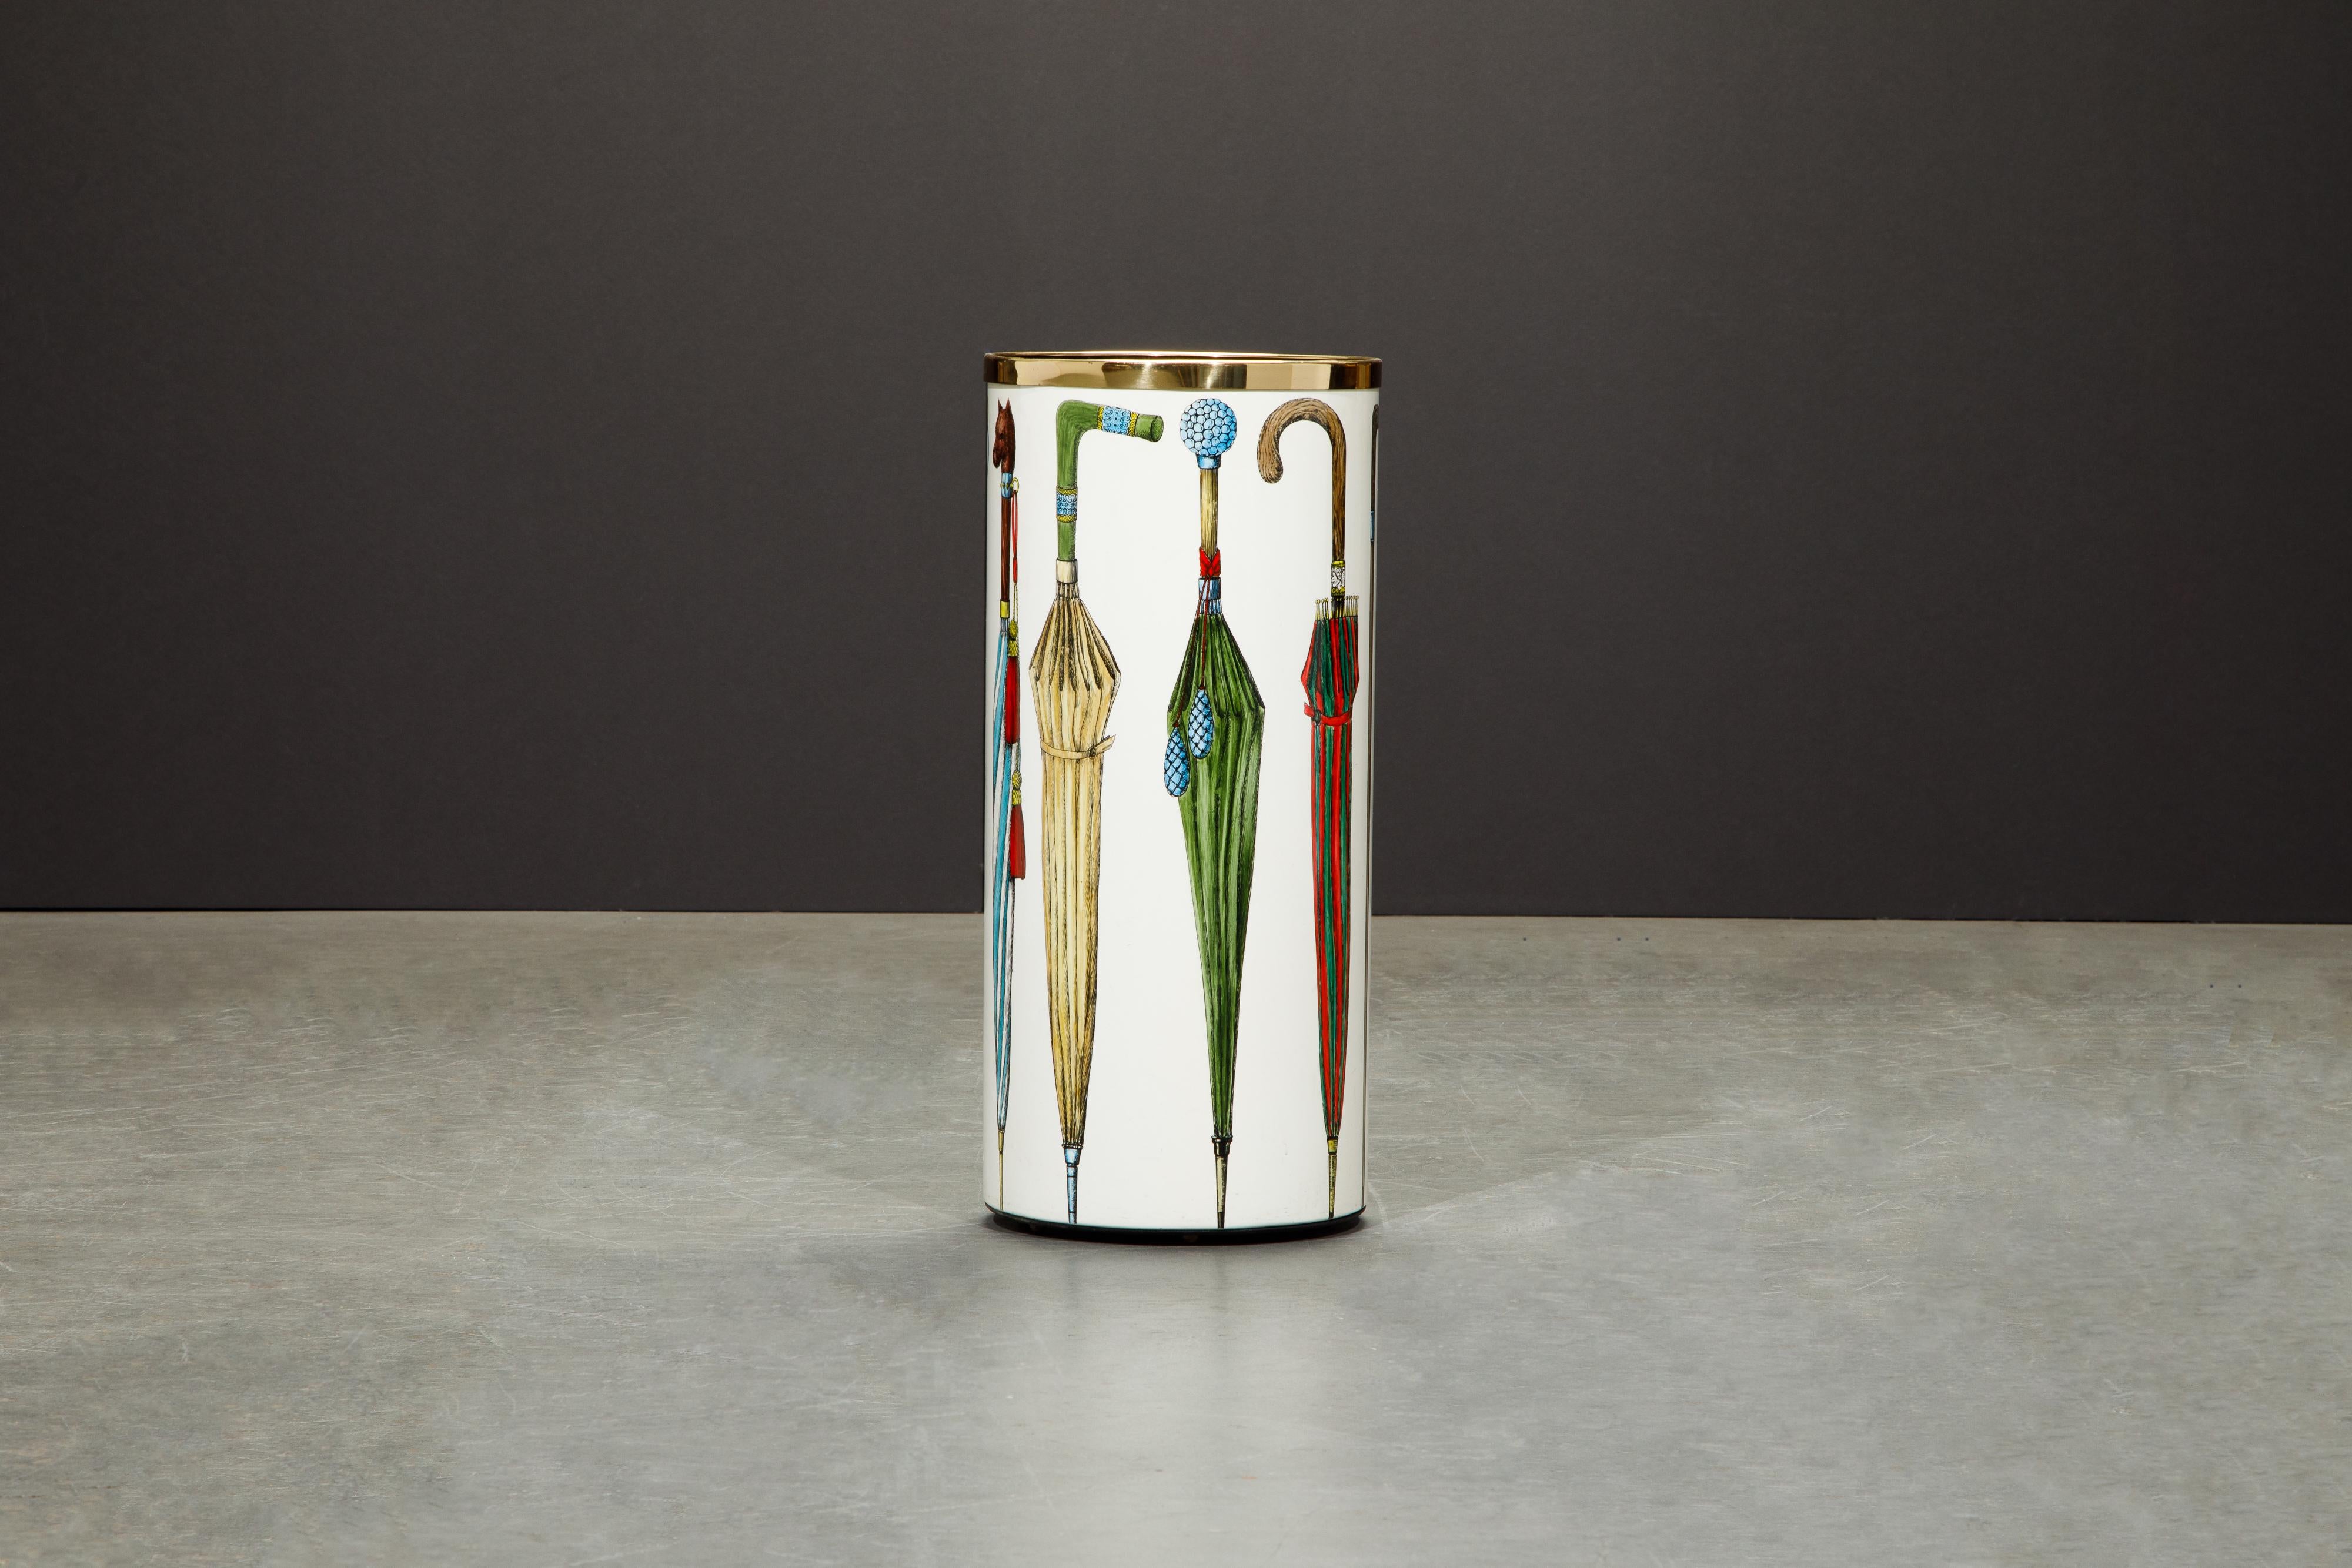 This umbrella stand is by Piero Fornasetti, signed underneath with label. This round umbrella bin is made with lithographic transfer and lacquered metal that has a white background with colorful umbrella motif with brass trim and brass feet.